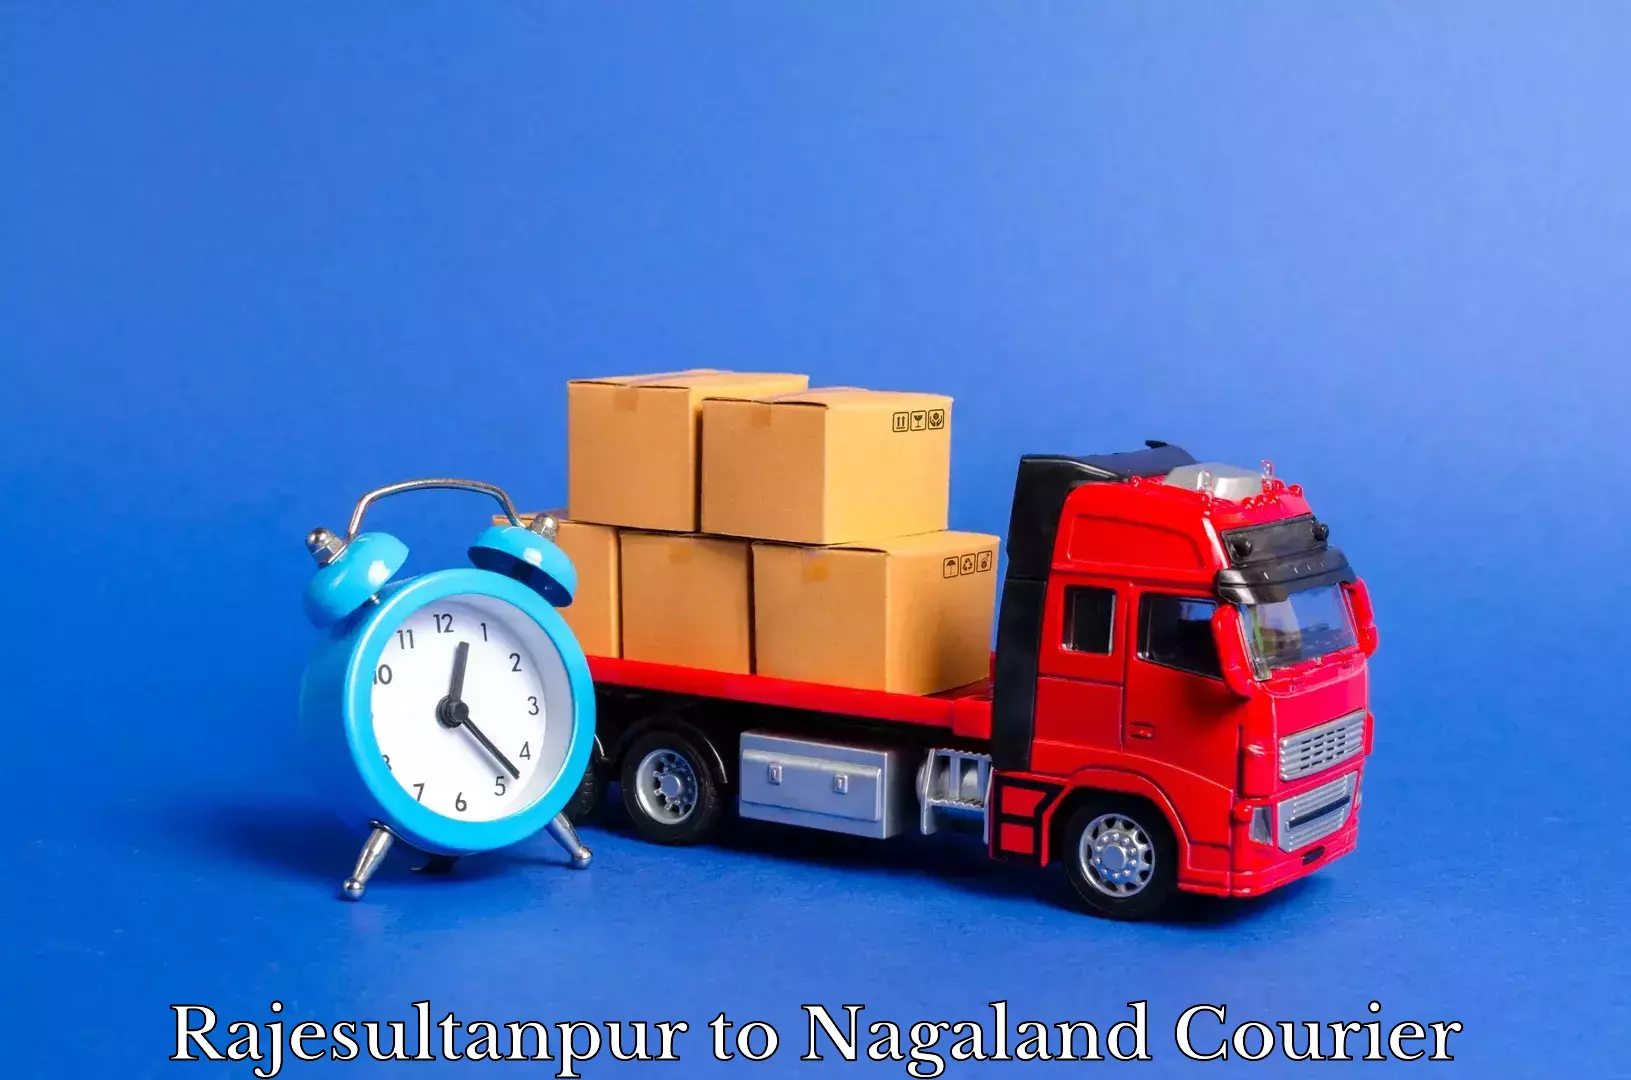 High-quality moving services Rajesultanpur to Nagaland